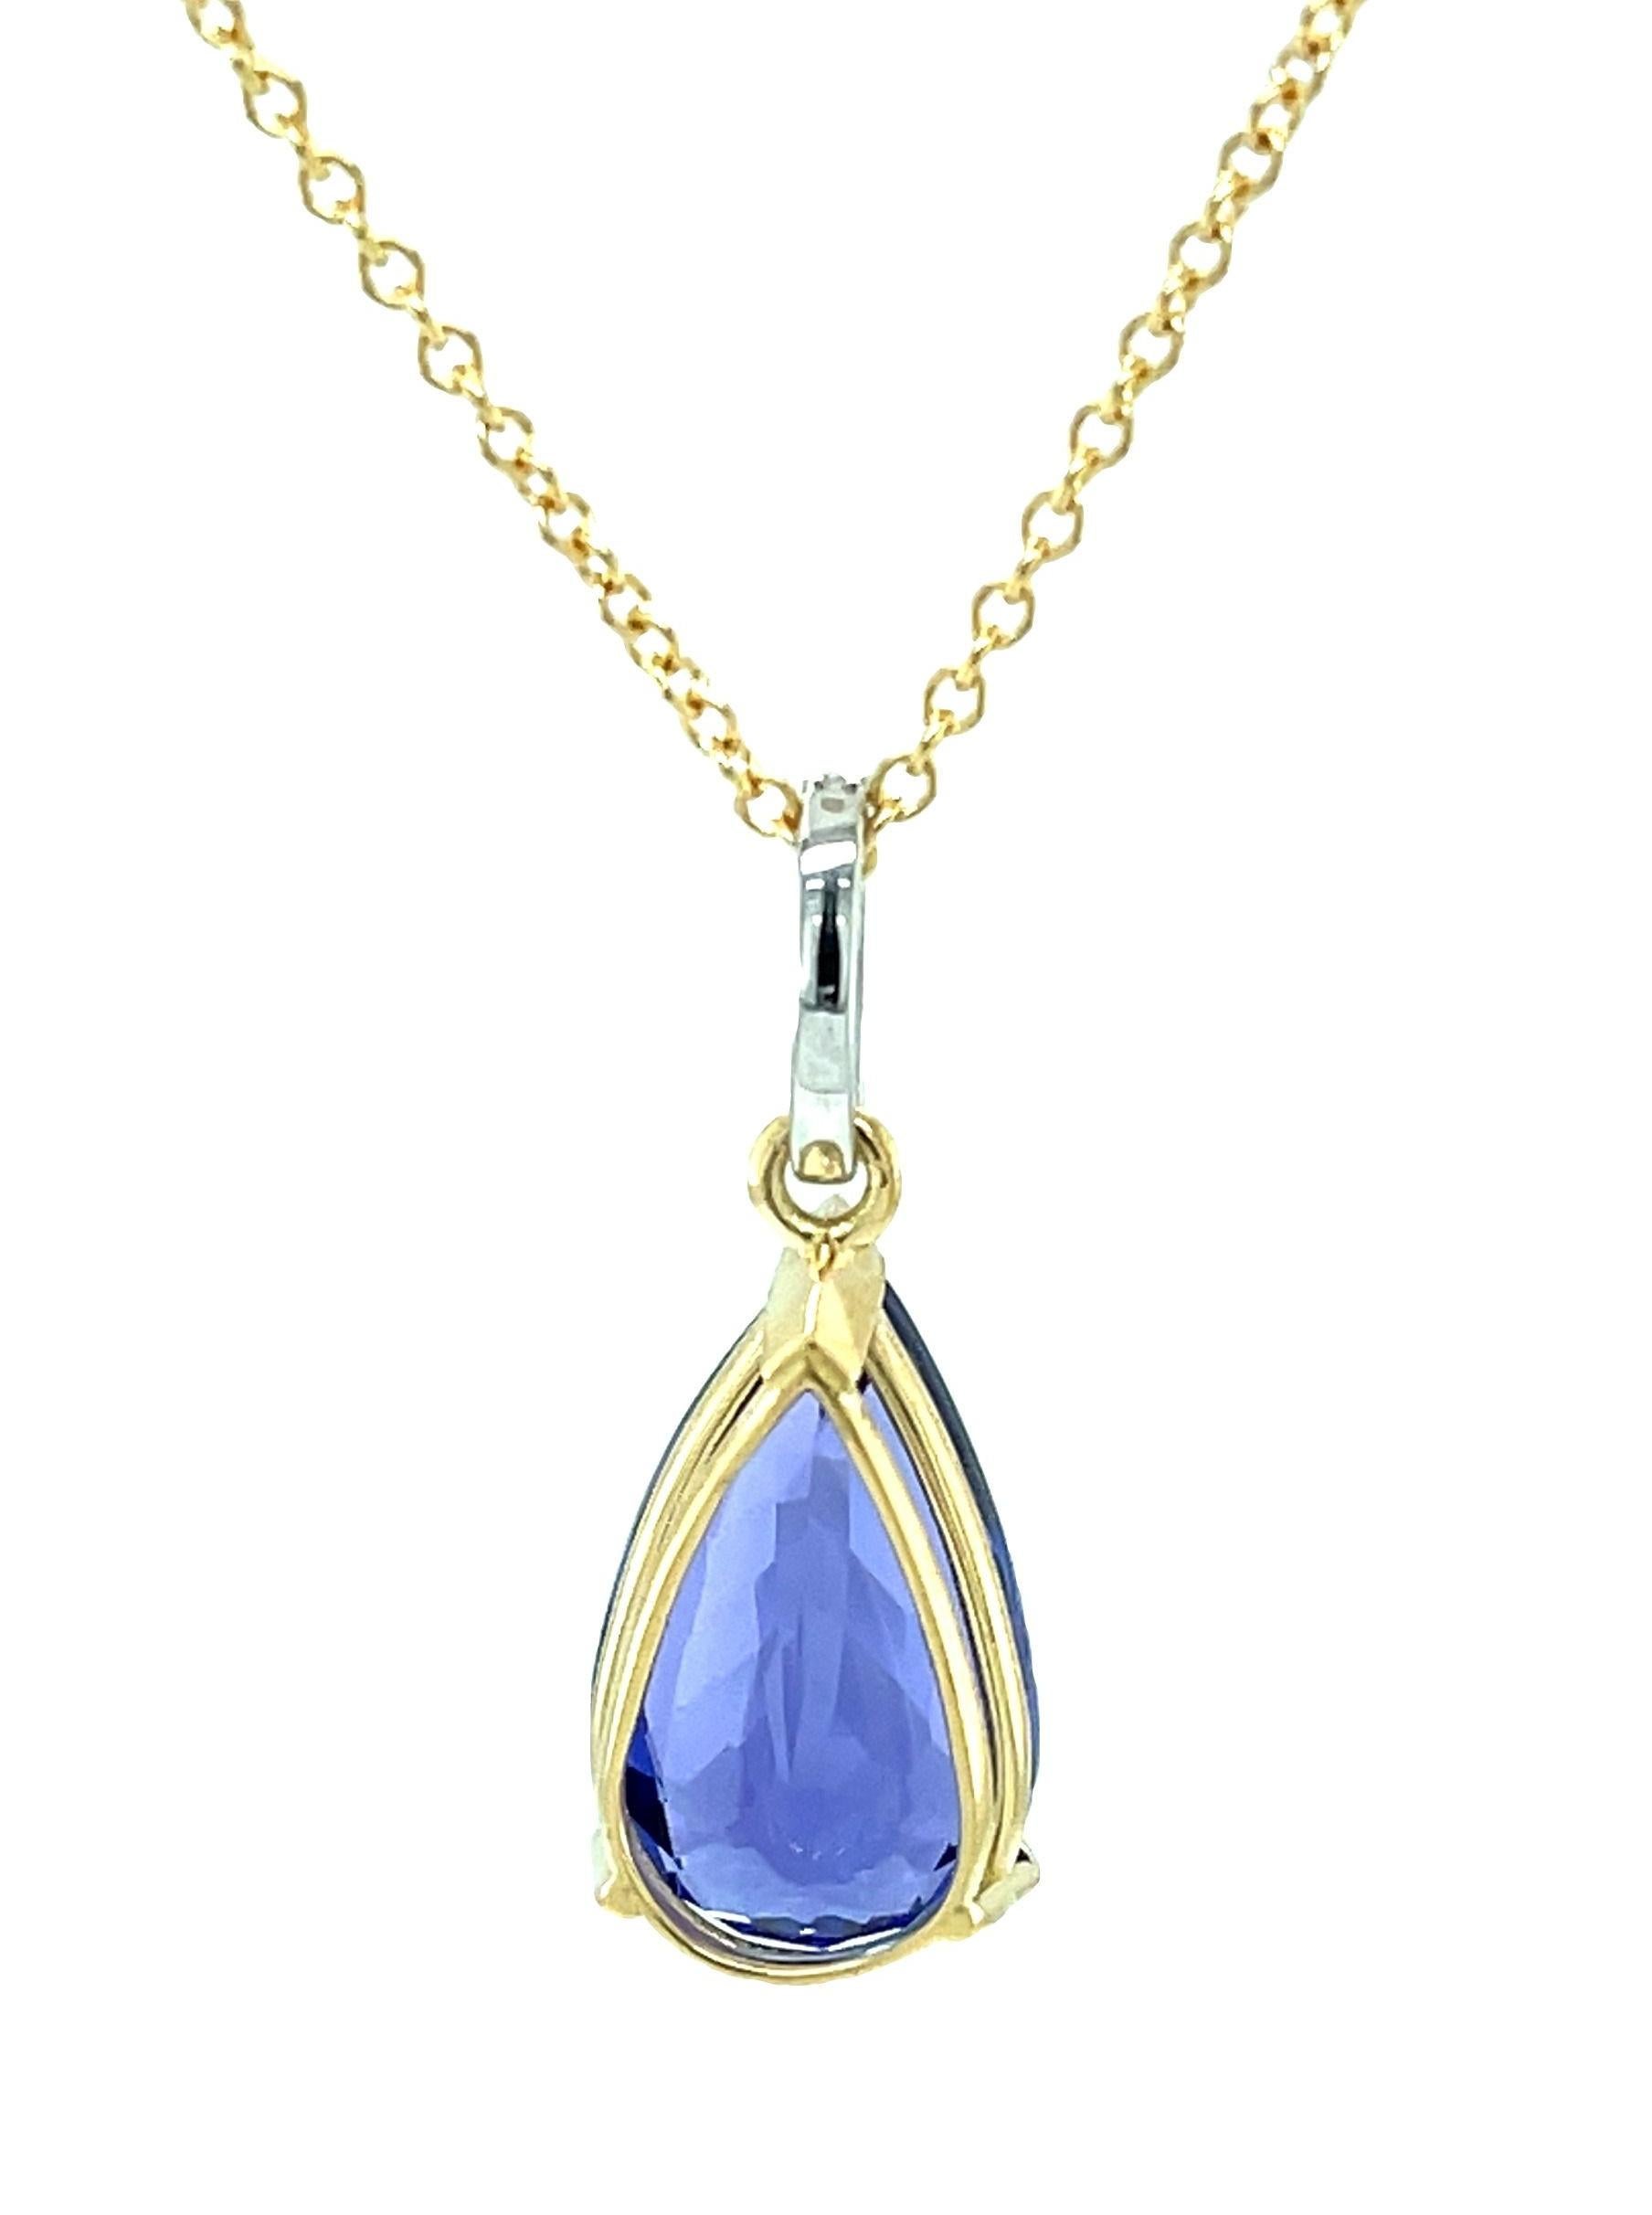 8.90 Carat Tanzanite & Diamond Pendant Necklace in White and Yellow Gold In New Condition For Sale In Los Angeles, CA